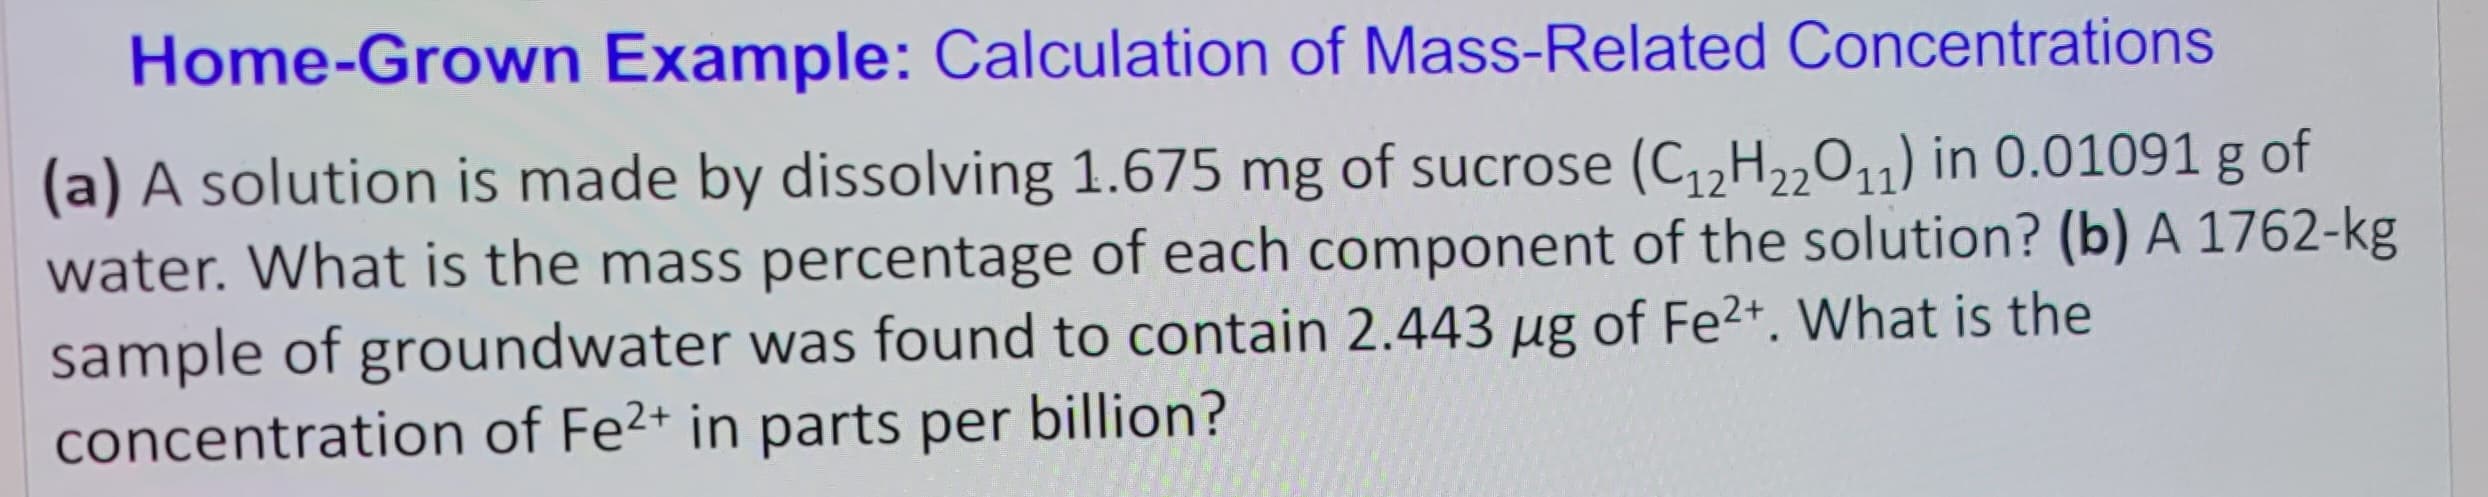 Home-Grown Example: Calculation of Mass-Related Concentrations
(a) A solution is made by dissolving 1.675 mg of sucrose (C₁2H22011) in 0.01091 g of
water. What is the mass percentage of each component of the solution? (b) A 1762-kg
sample of groundwater was found to contain 2.443 µg of Fe²+. What is the
concentration of Fe²+ in parts per billion?